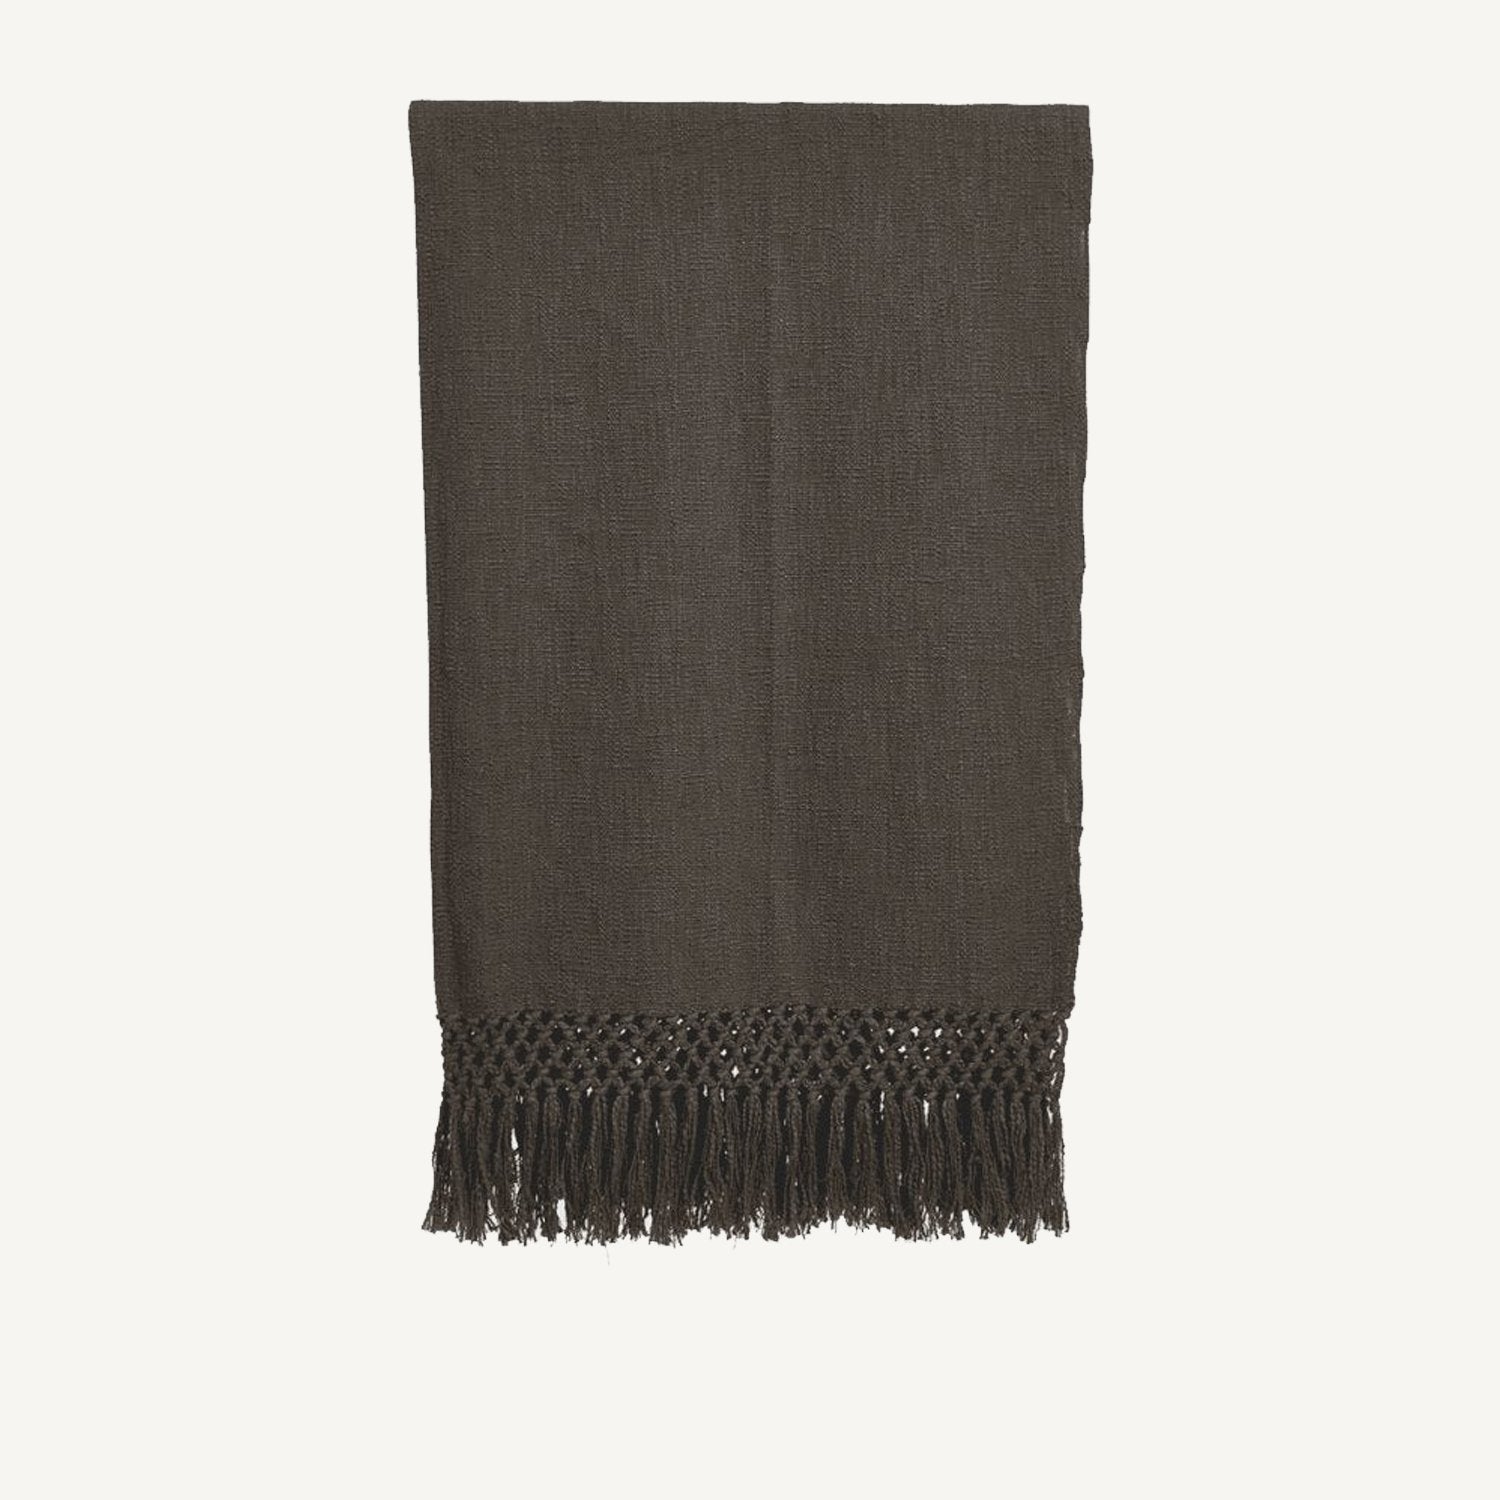 Crochet & Fringe Woven Throw in Charcoal - Annie & Flora